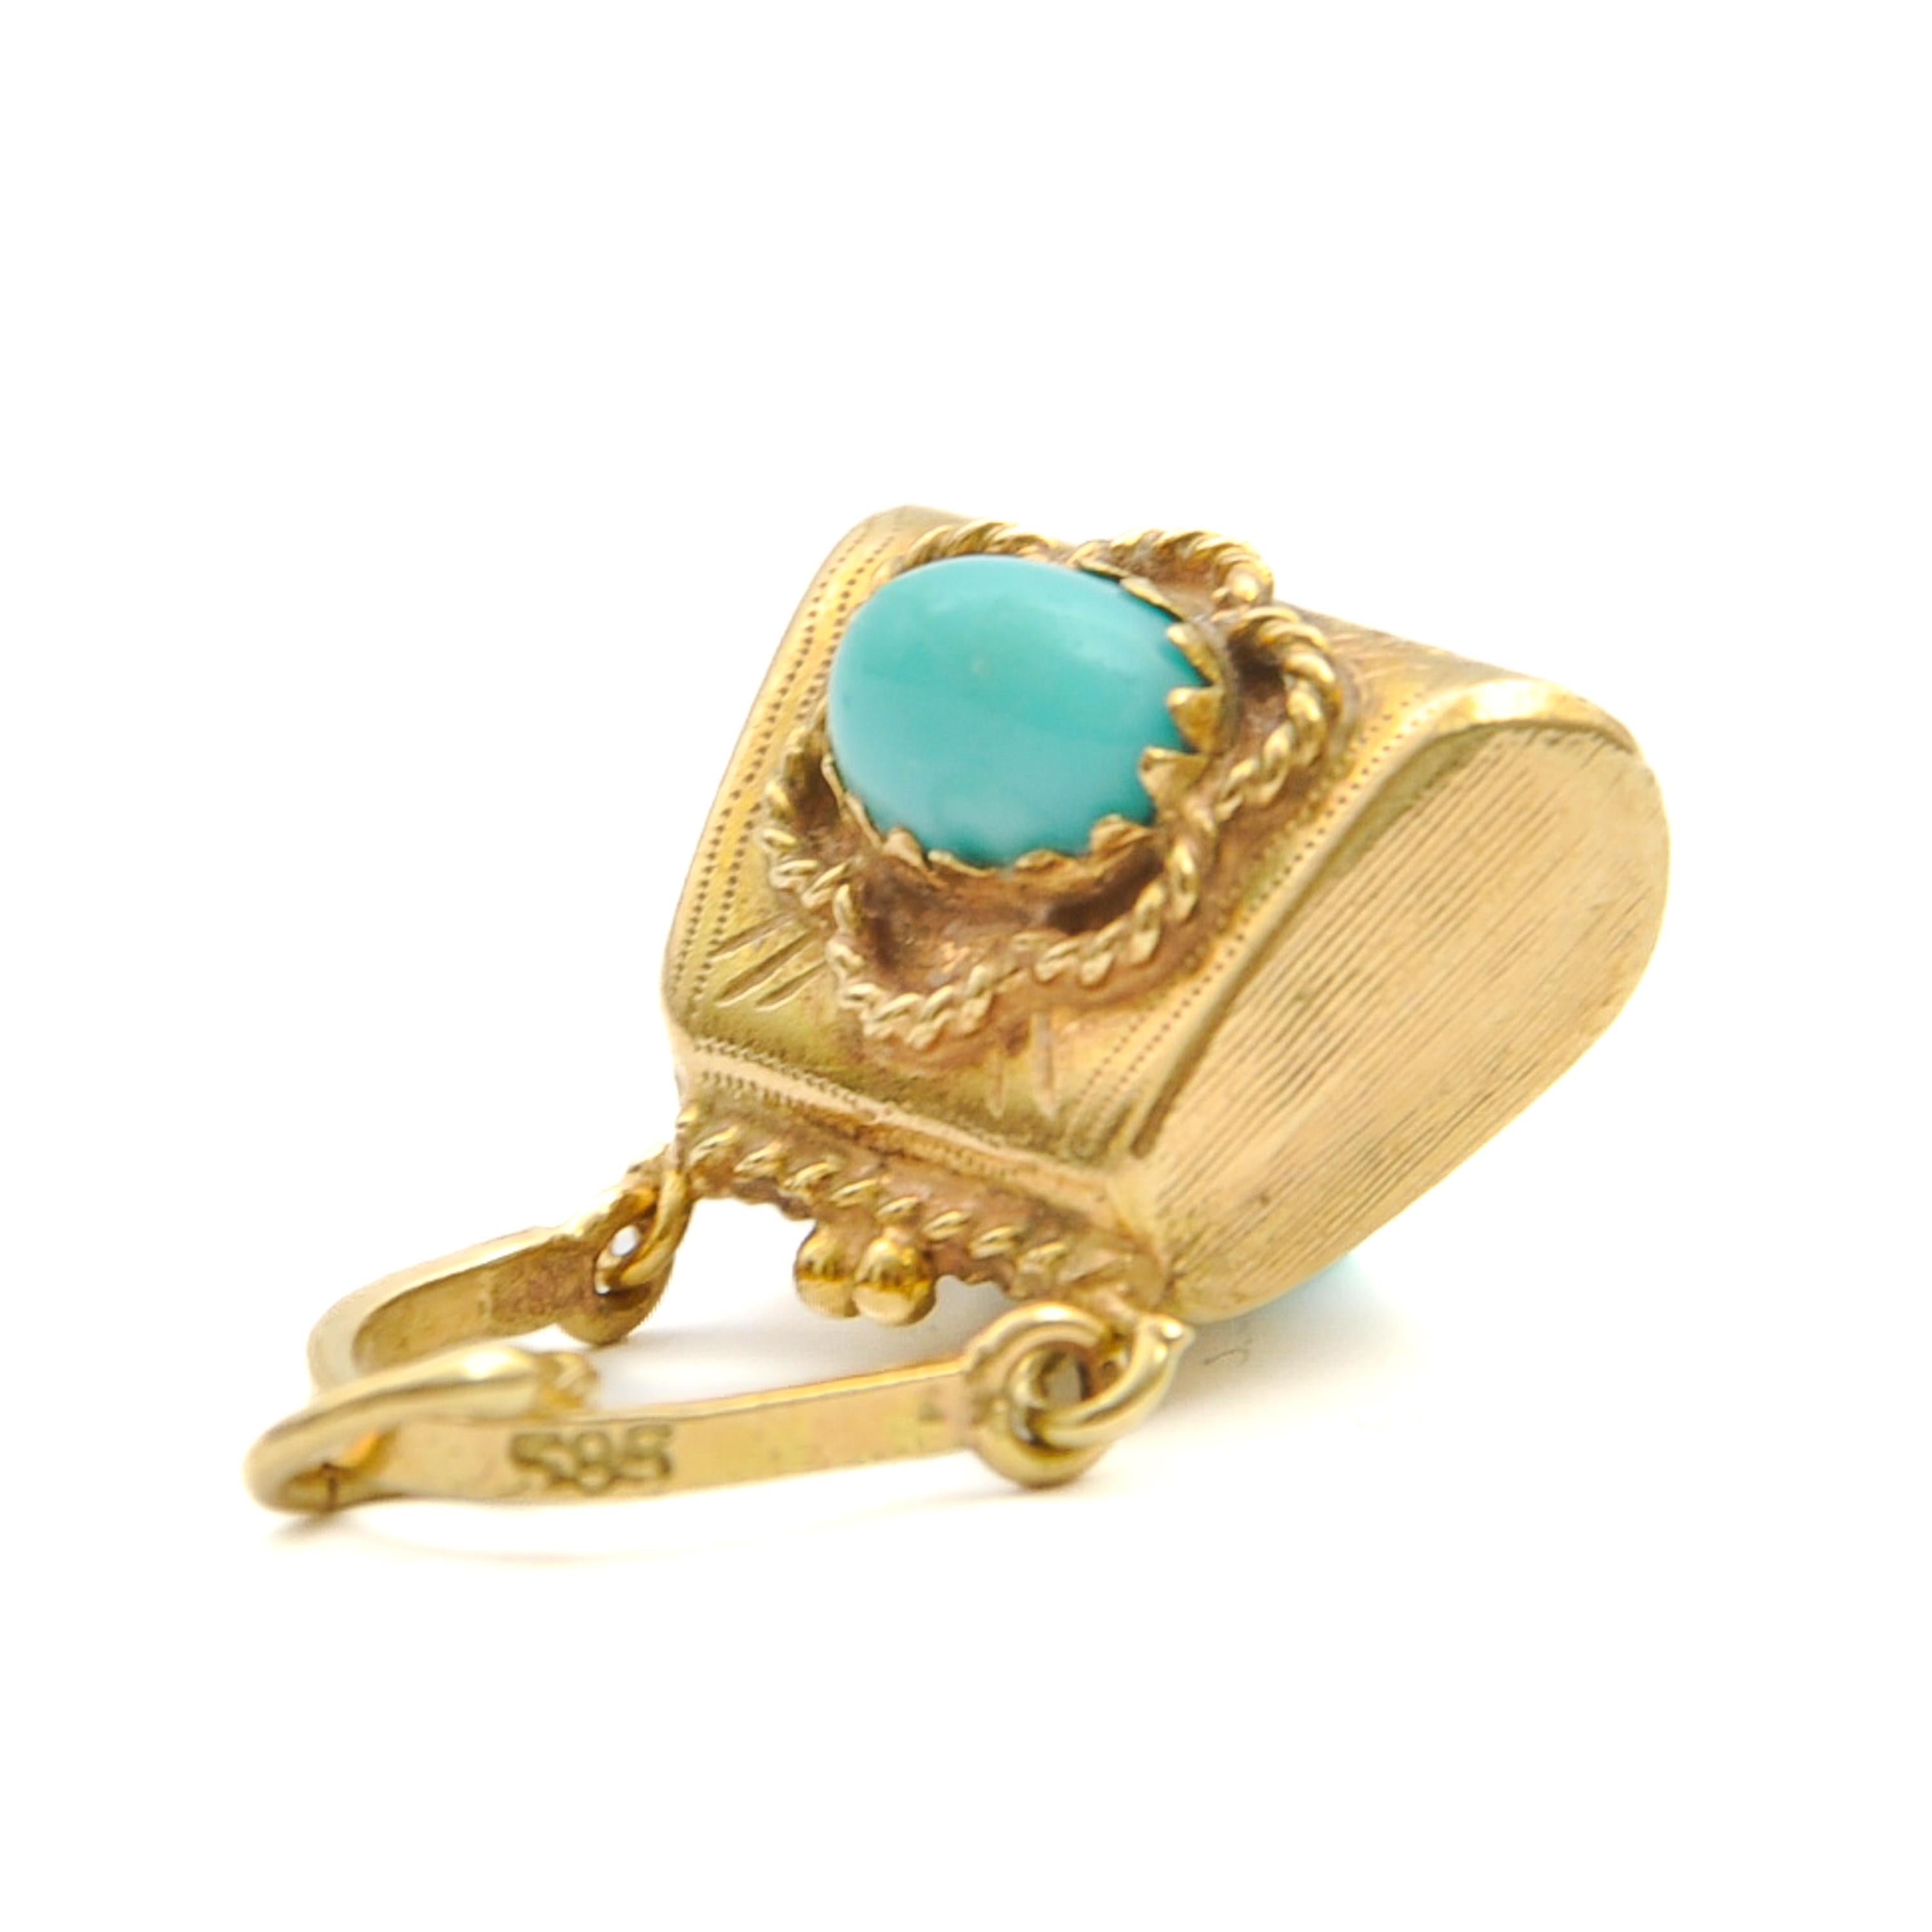 Vintage 14K Gold and Turquoise Purse Charm Pendant In Good Condition For Sale In Rotterdam, NL